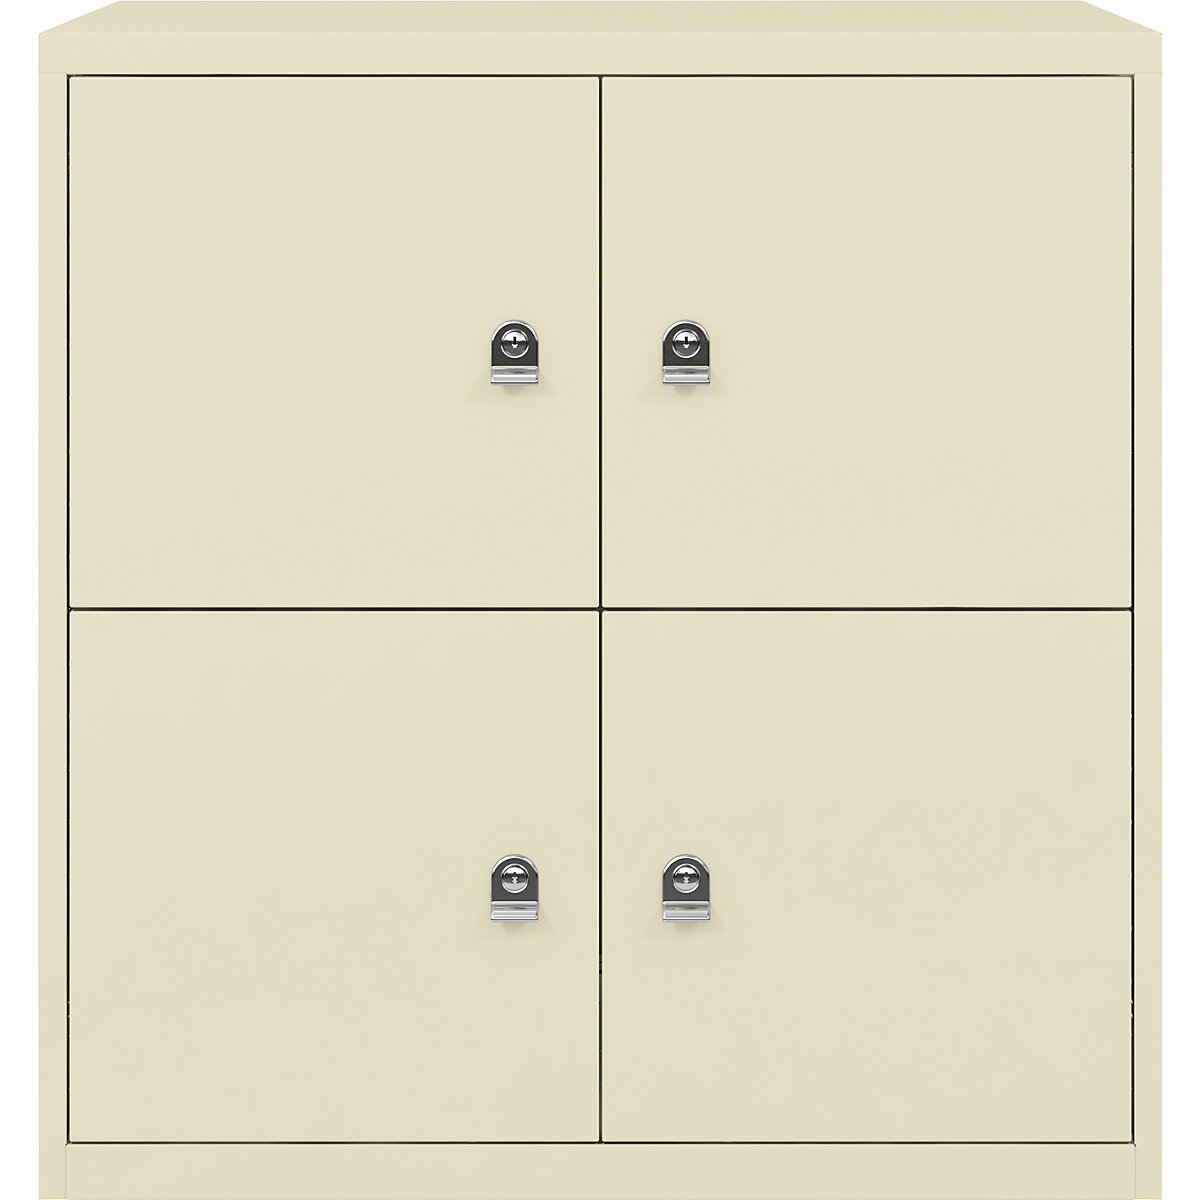 LateralFile™ lodge – BISLEY, with 4 lockable compartments, height 375 mm each, light ivory